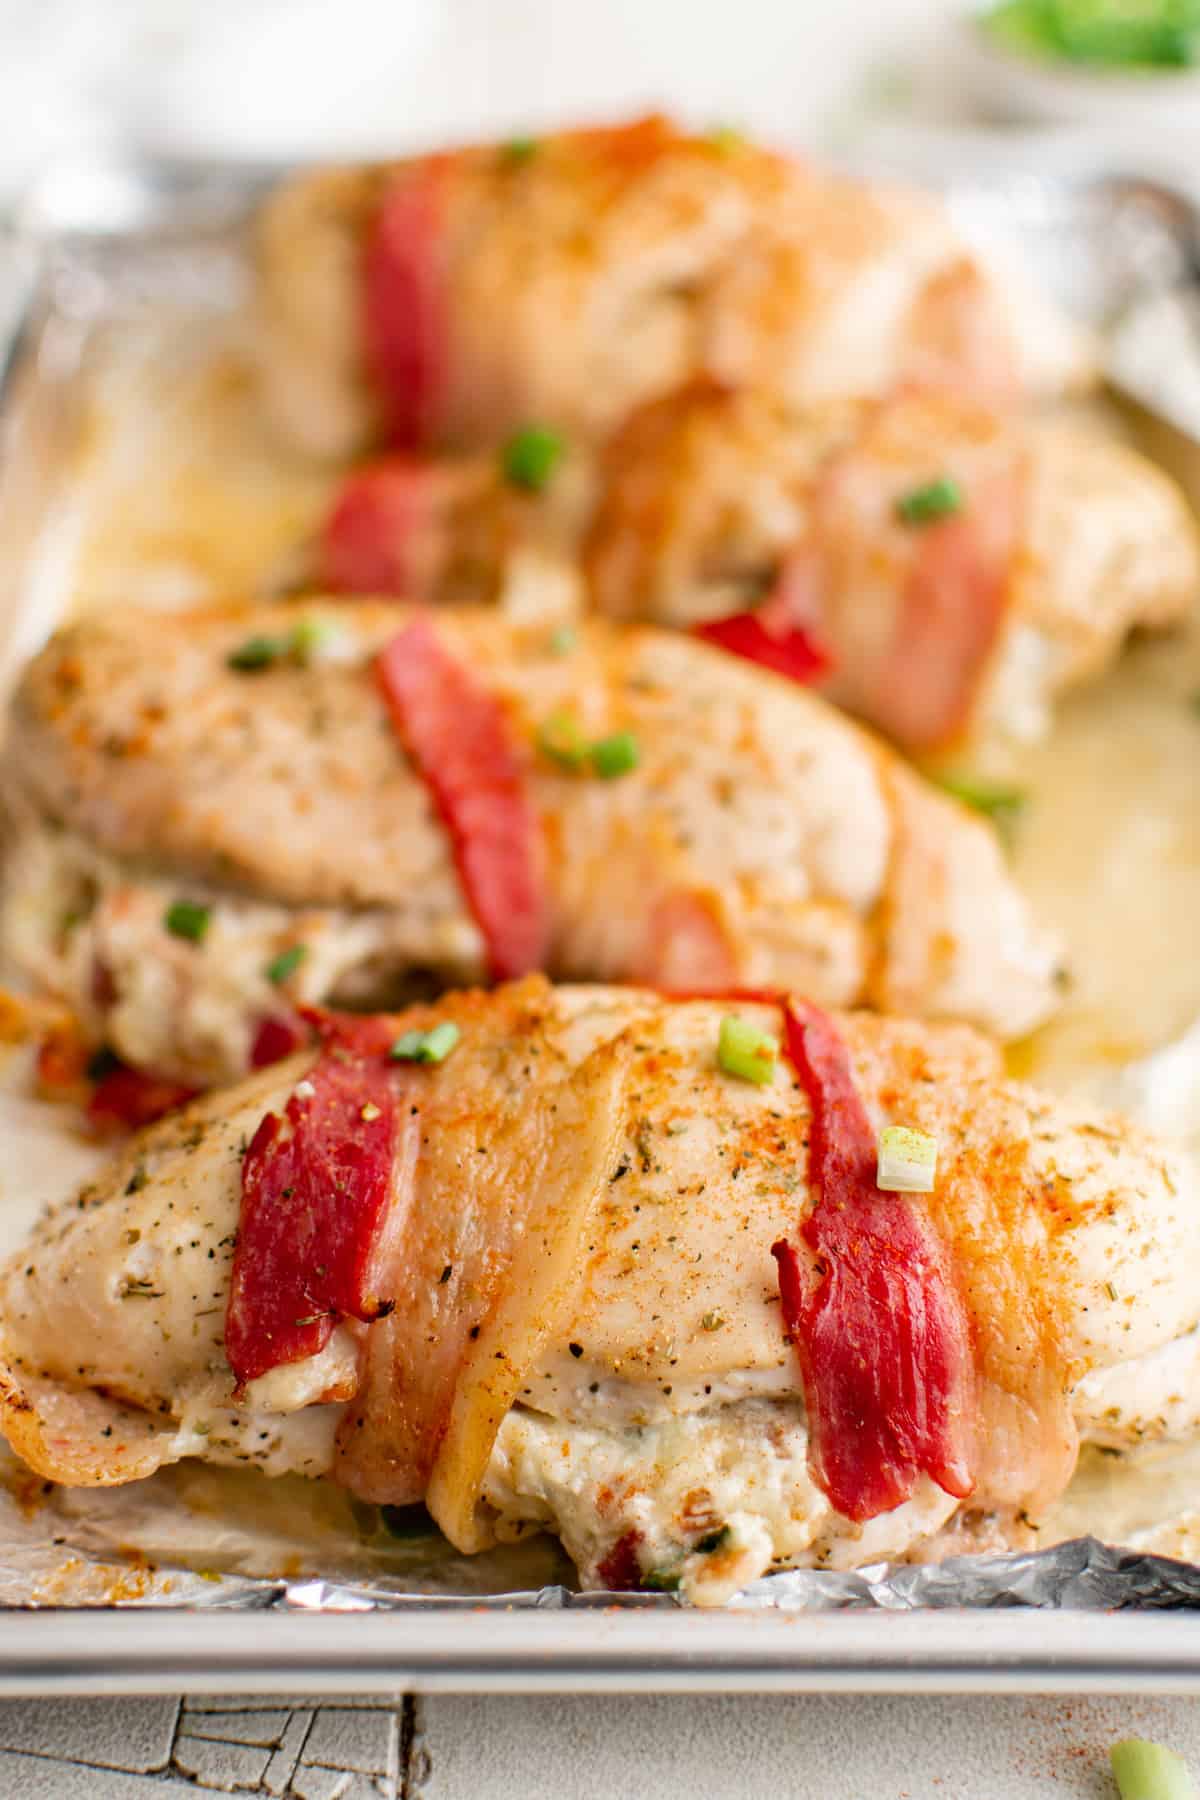 close up view of the completed bacon wrapped stuffed chicken breast on a baking tray